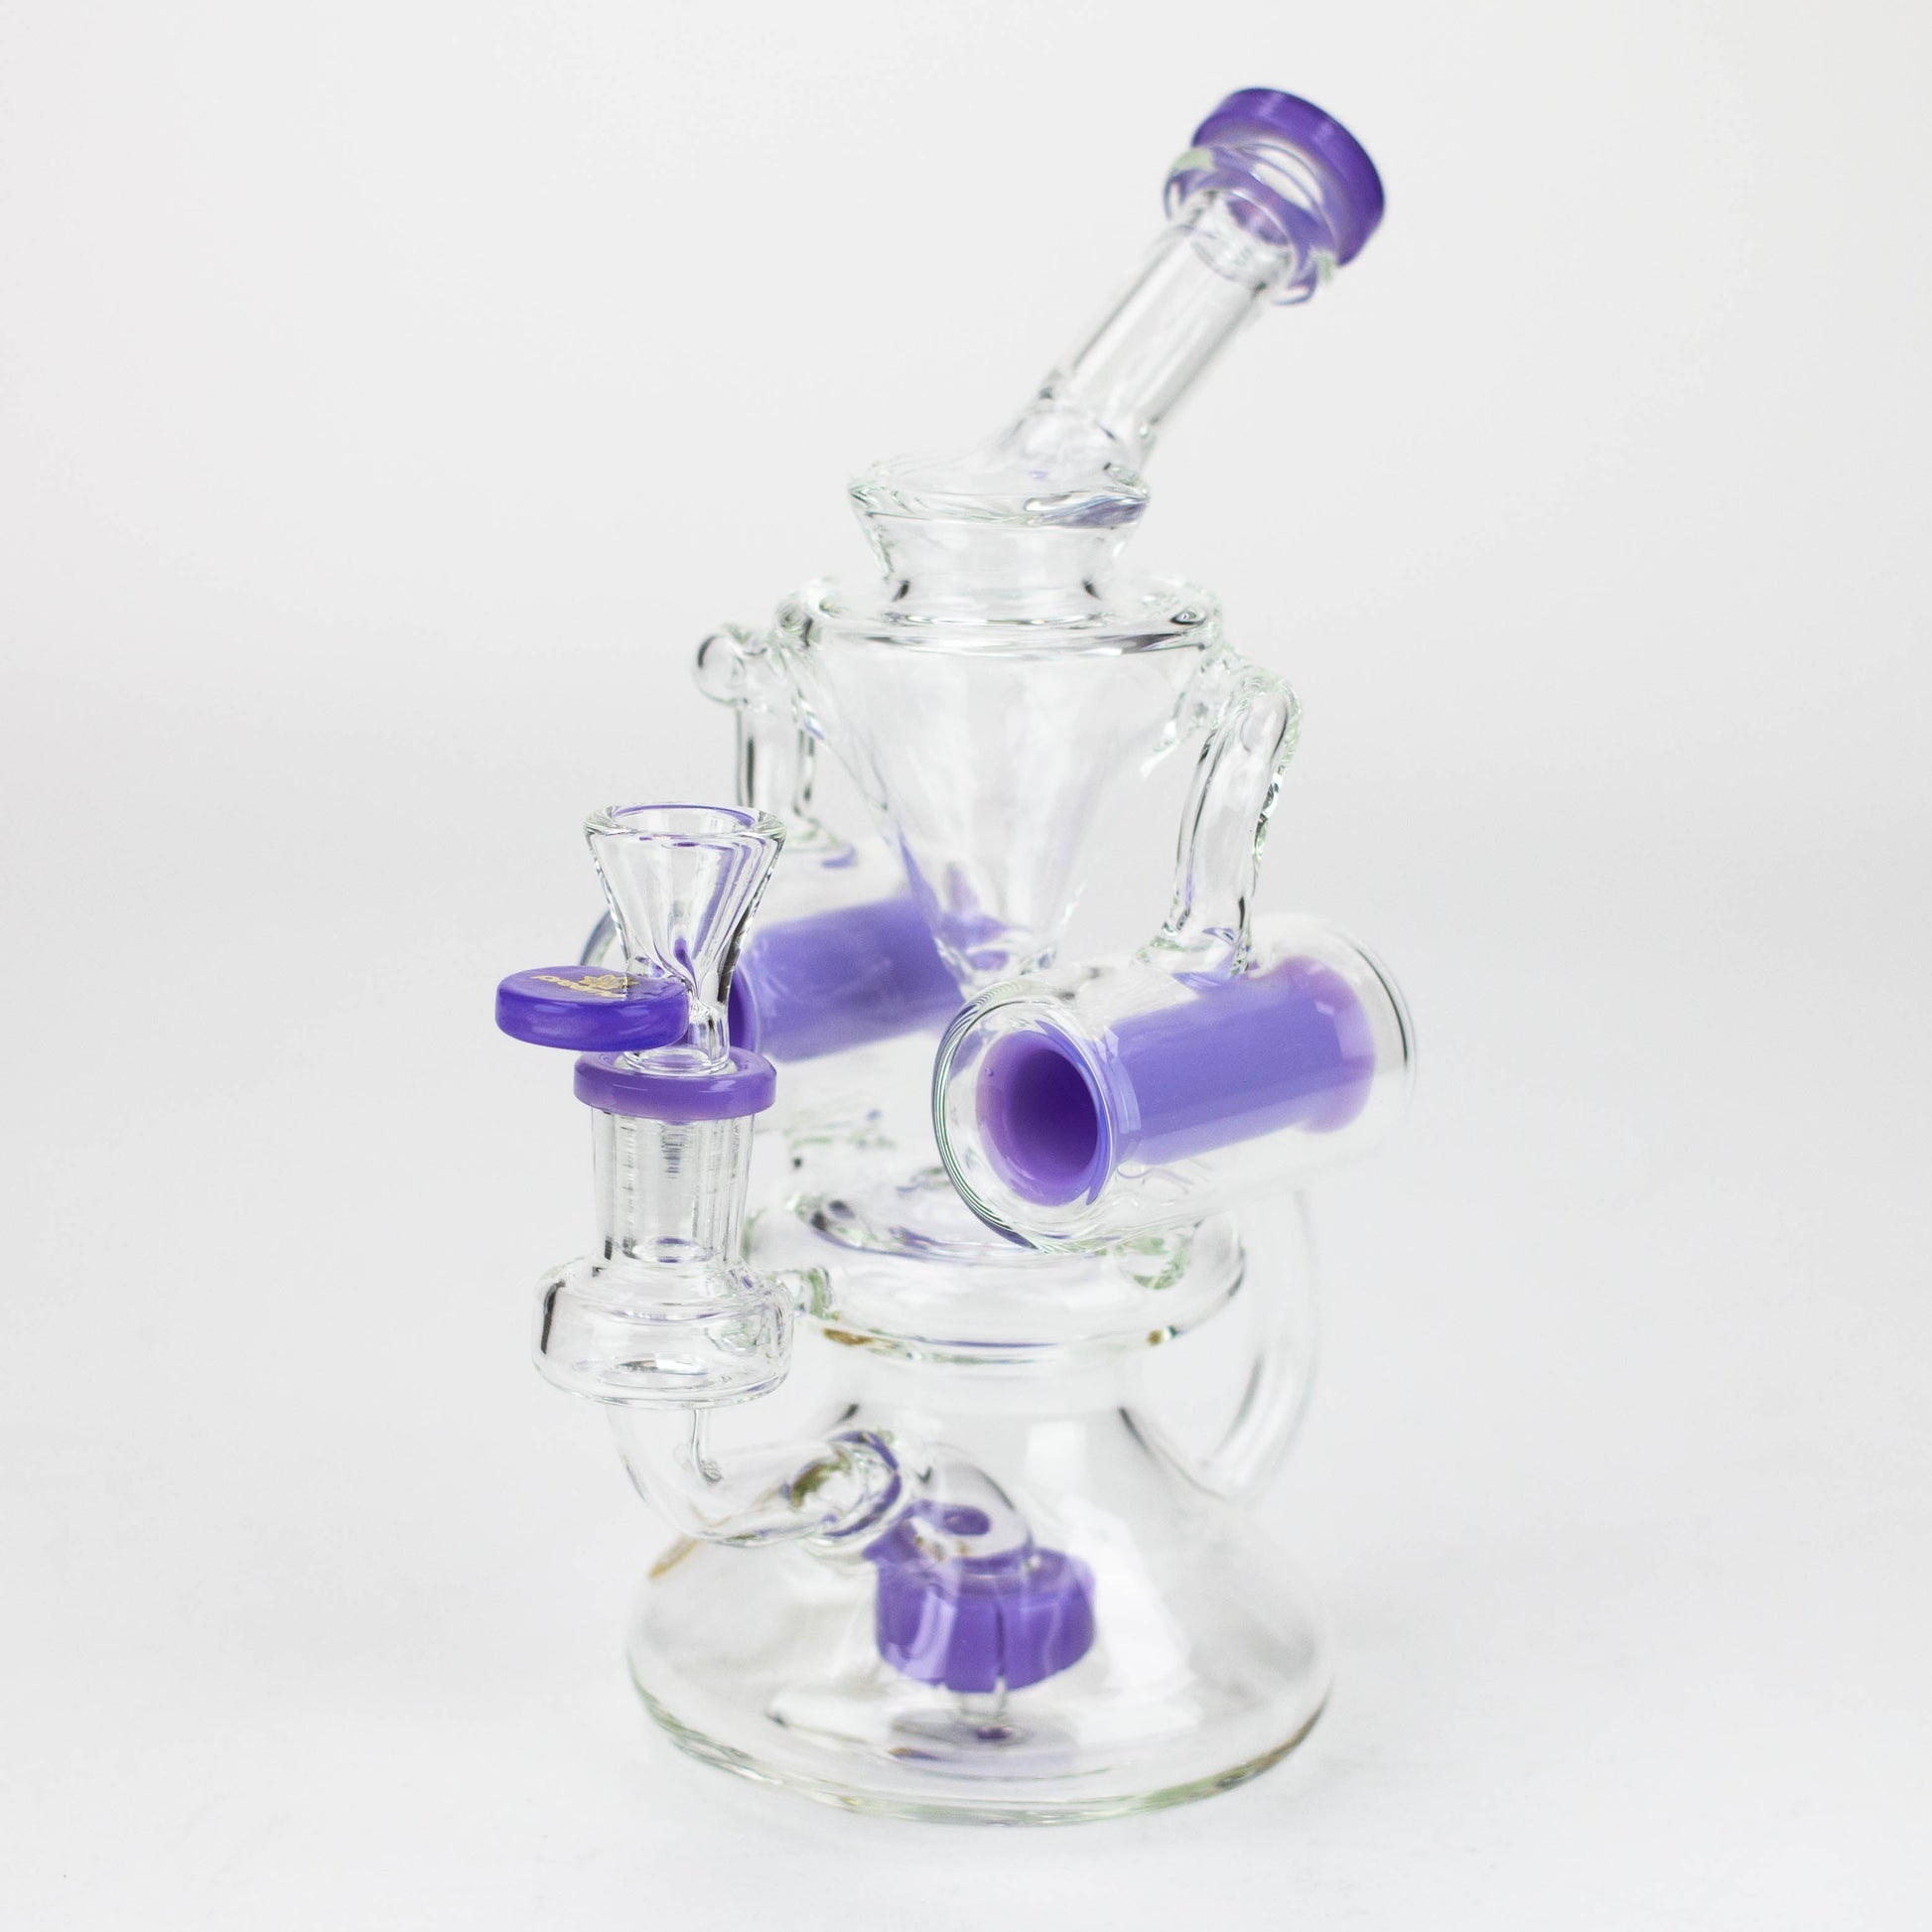 preemo -  8 inch Double Finger Hole Recycler [P086]_11